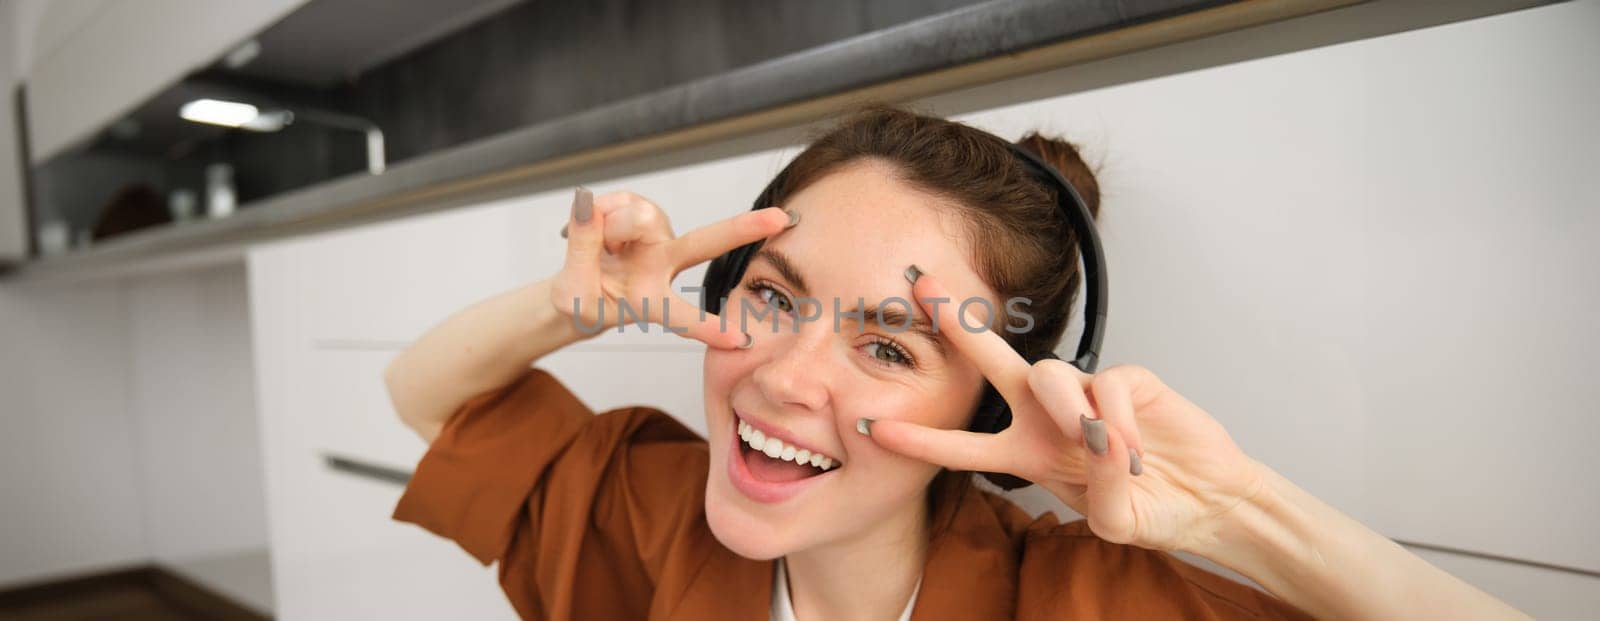 Happy female model listens music, posing in wireless headphones, smiling and laughing, showing v-sign.